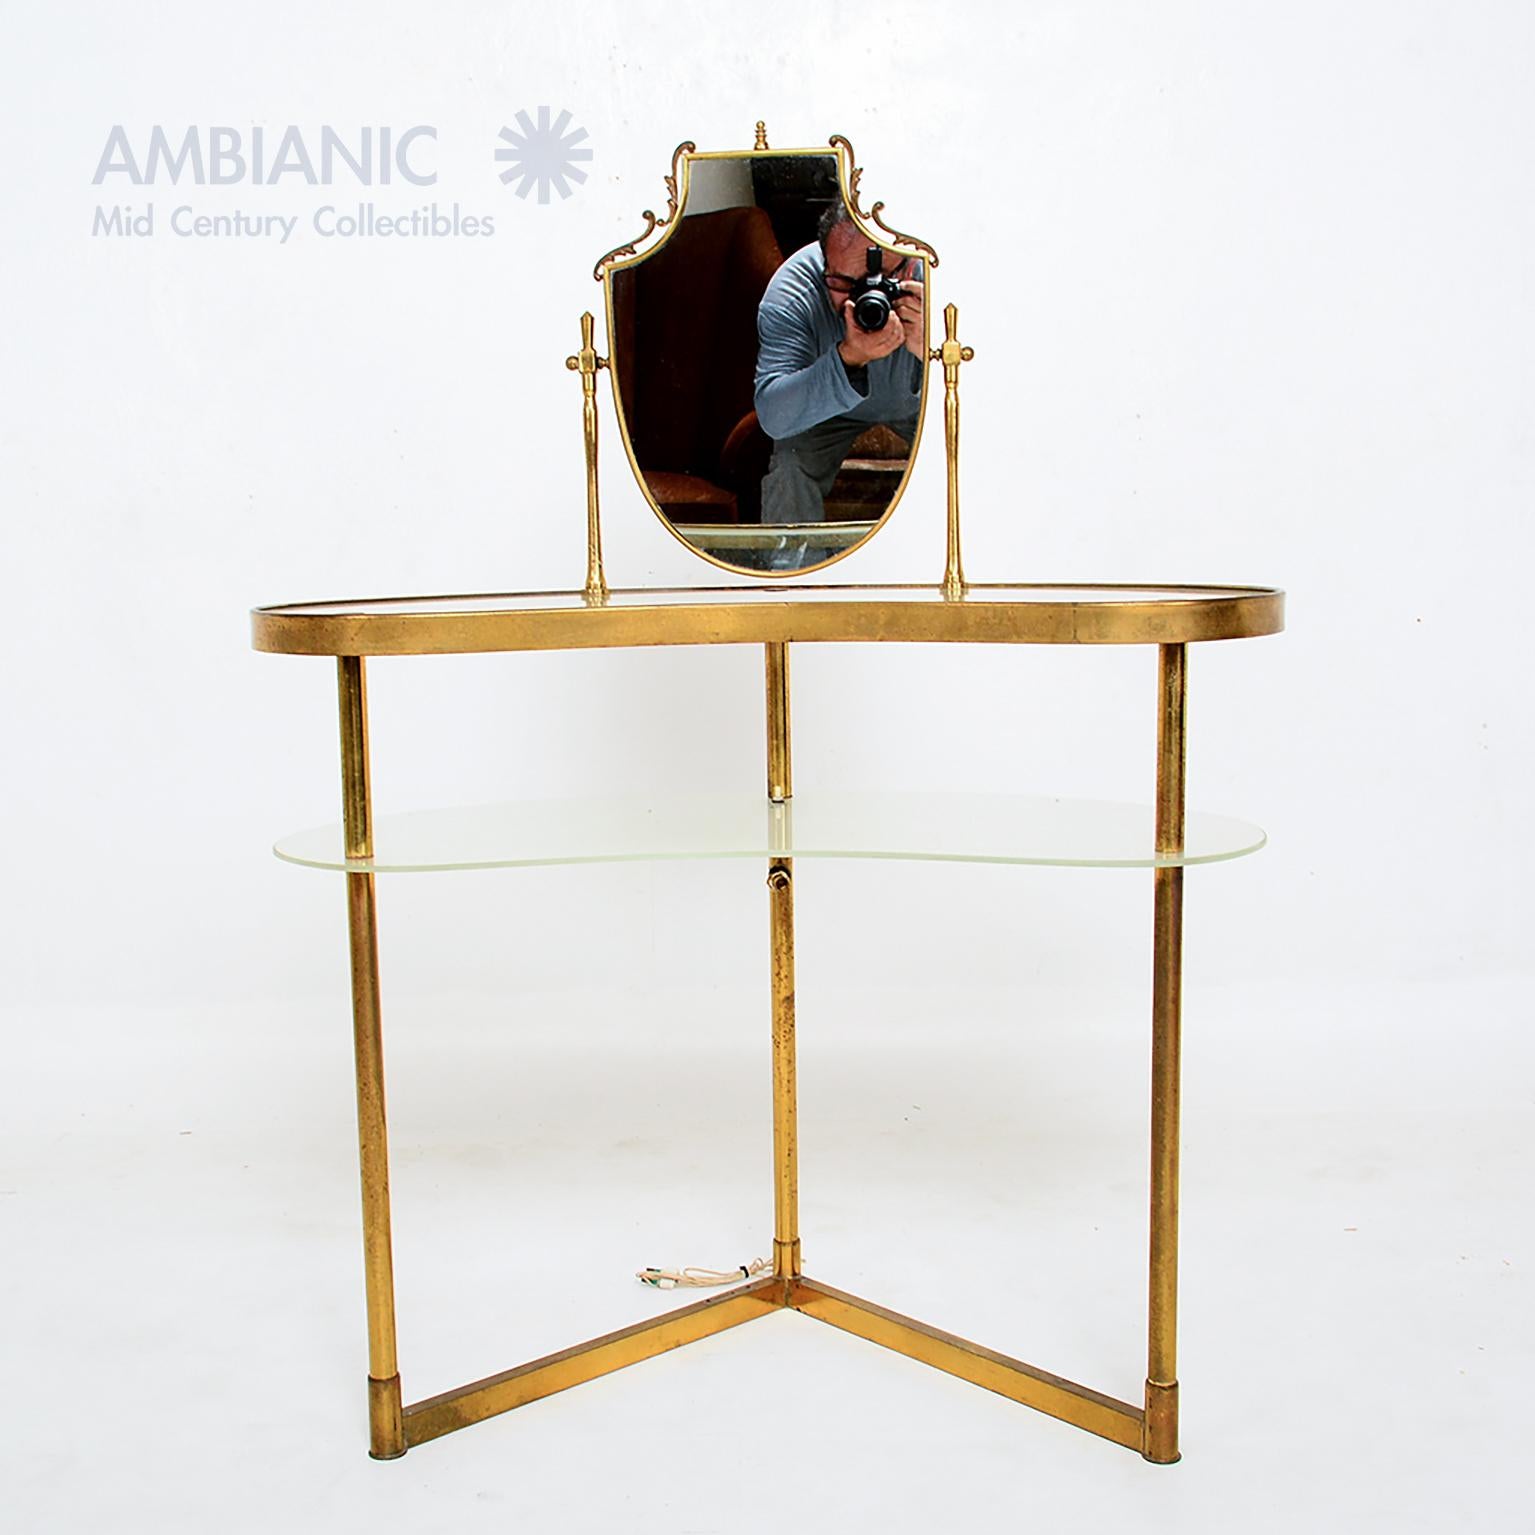 For your consideration: a vintage Italian vanity table in the style of Fontana Arte. Brass frame structure supports the top with glass and glass shelf. The top has an adjustable vanity mirror in a decorative frame.
Mirror can be tilted up or down.